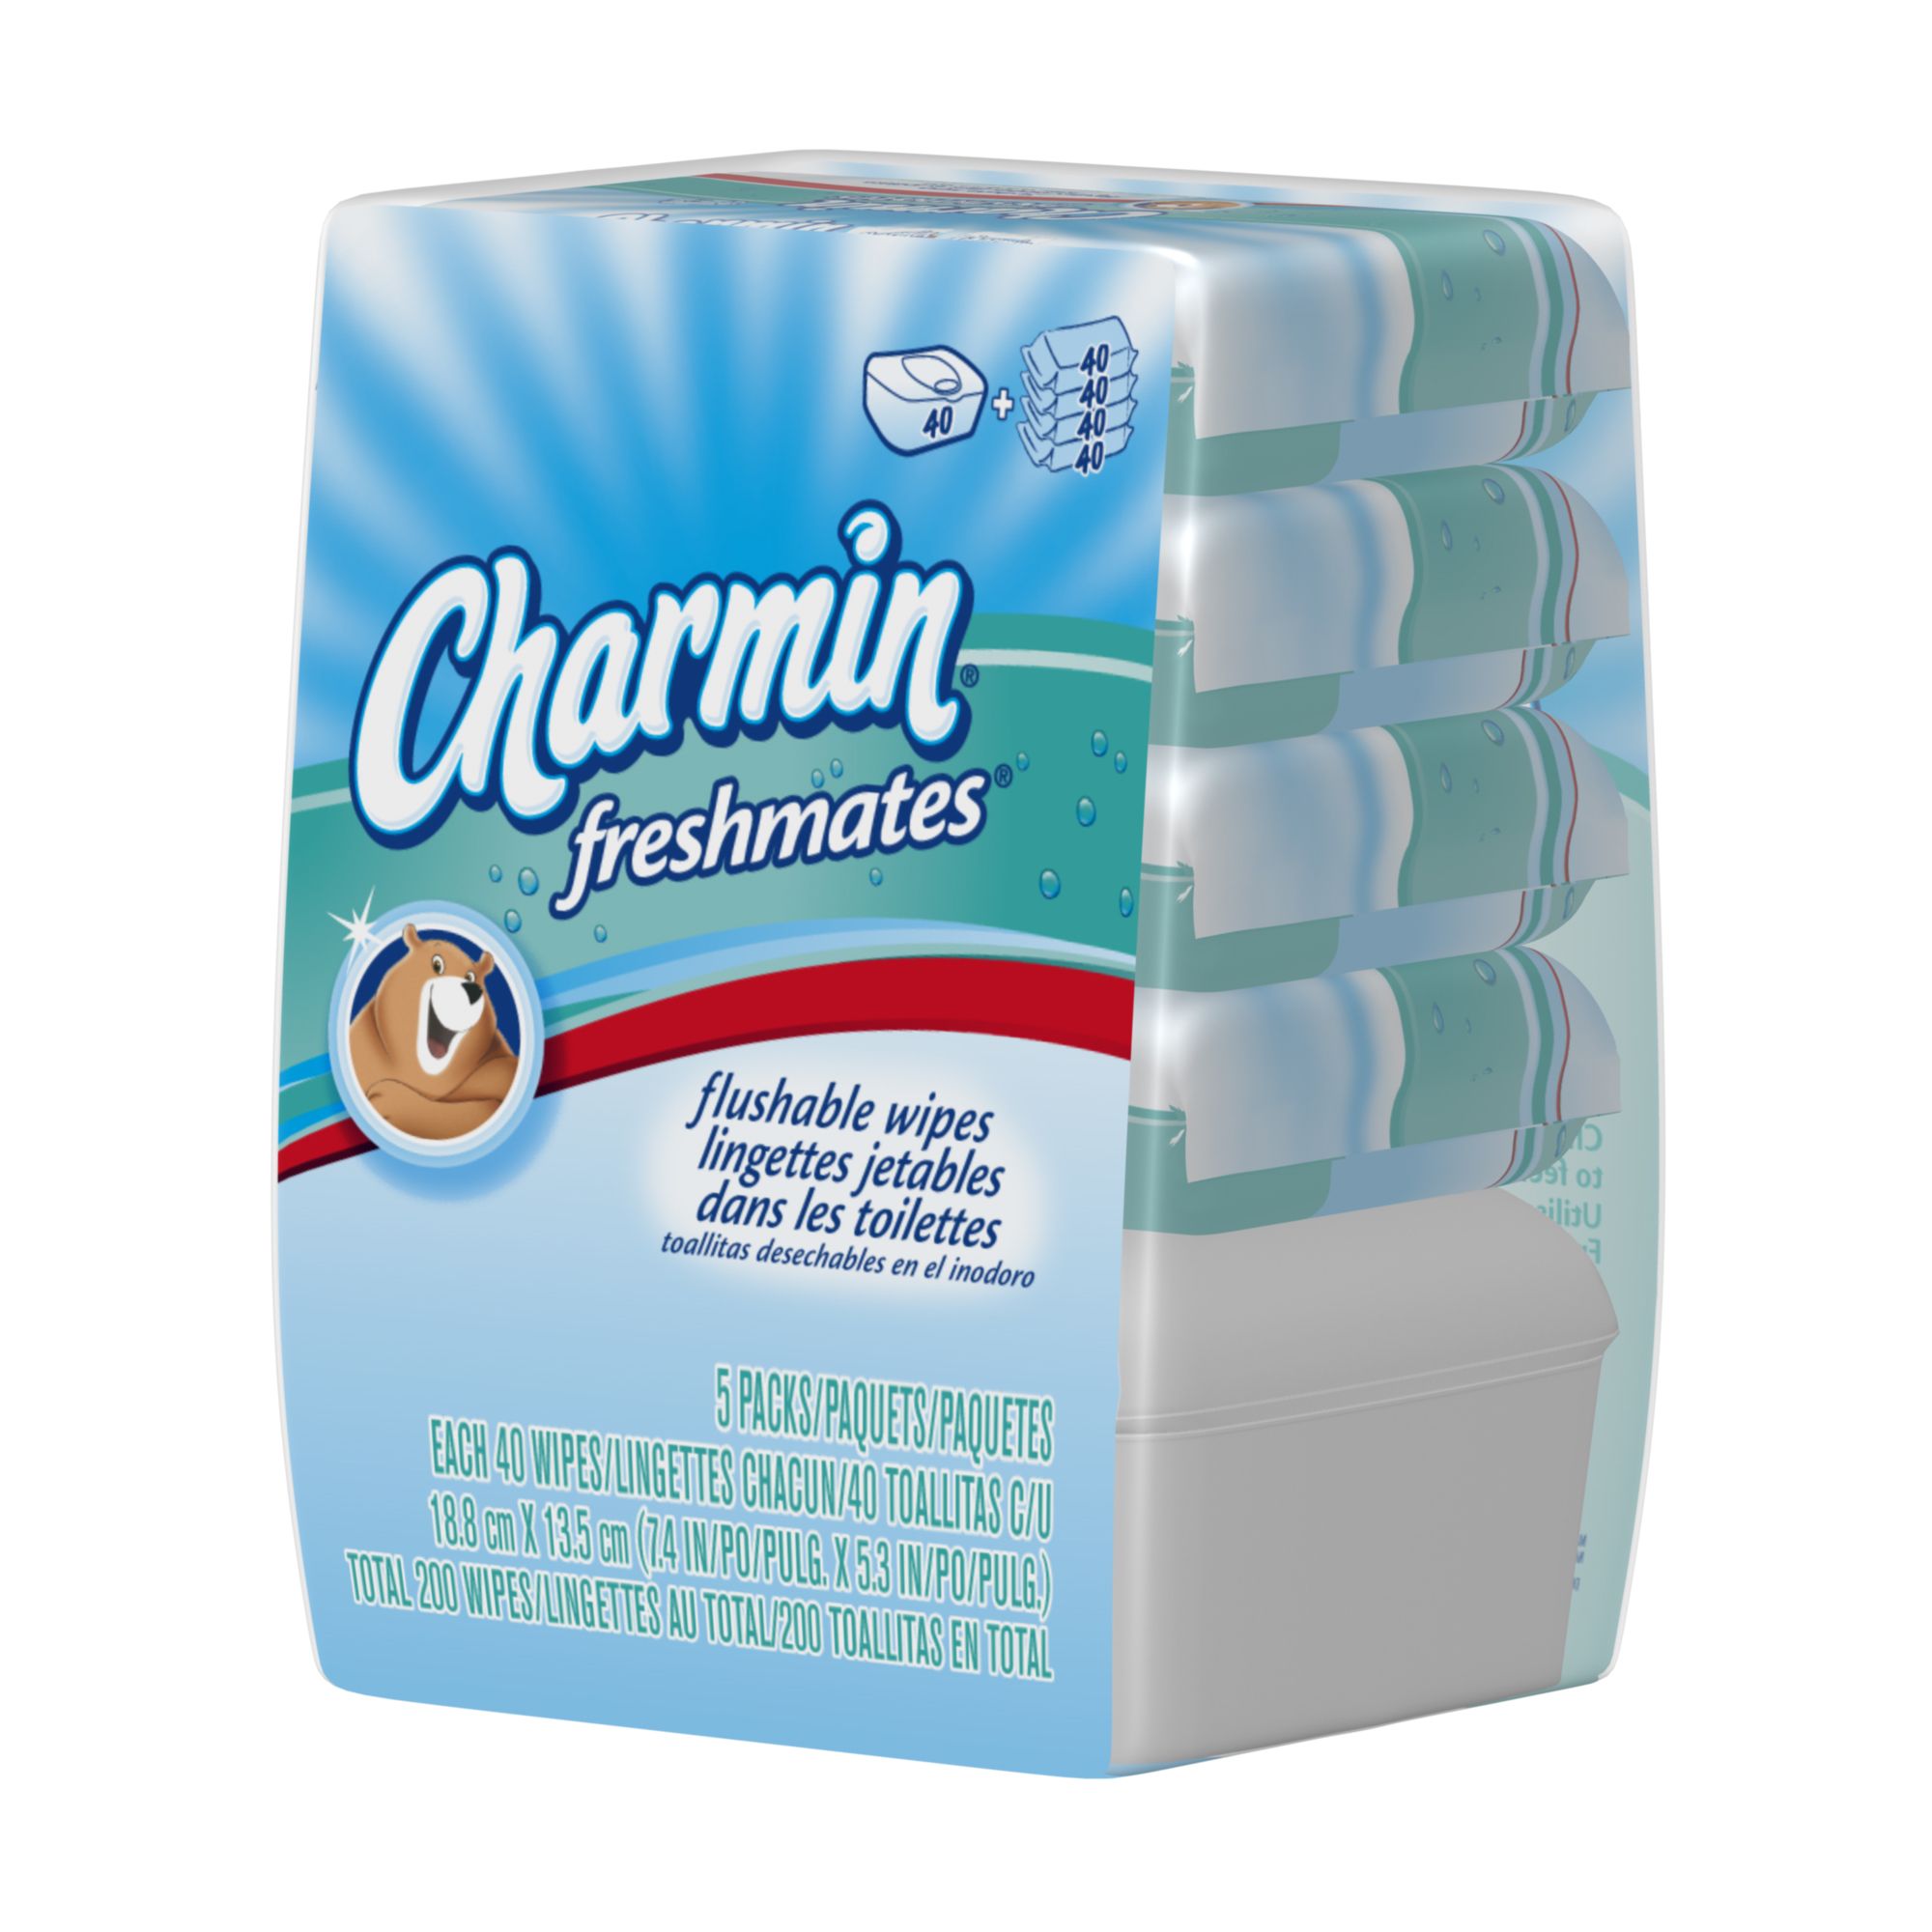 Charmin 'BRB Bot' Keeps Your Video Chat Bathroom Breaks Under Wraps